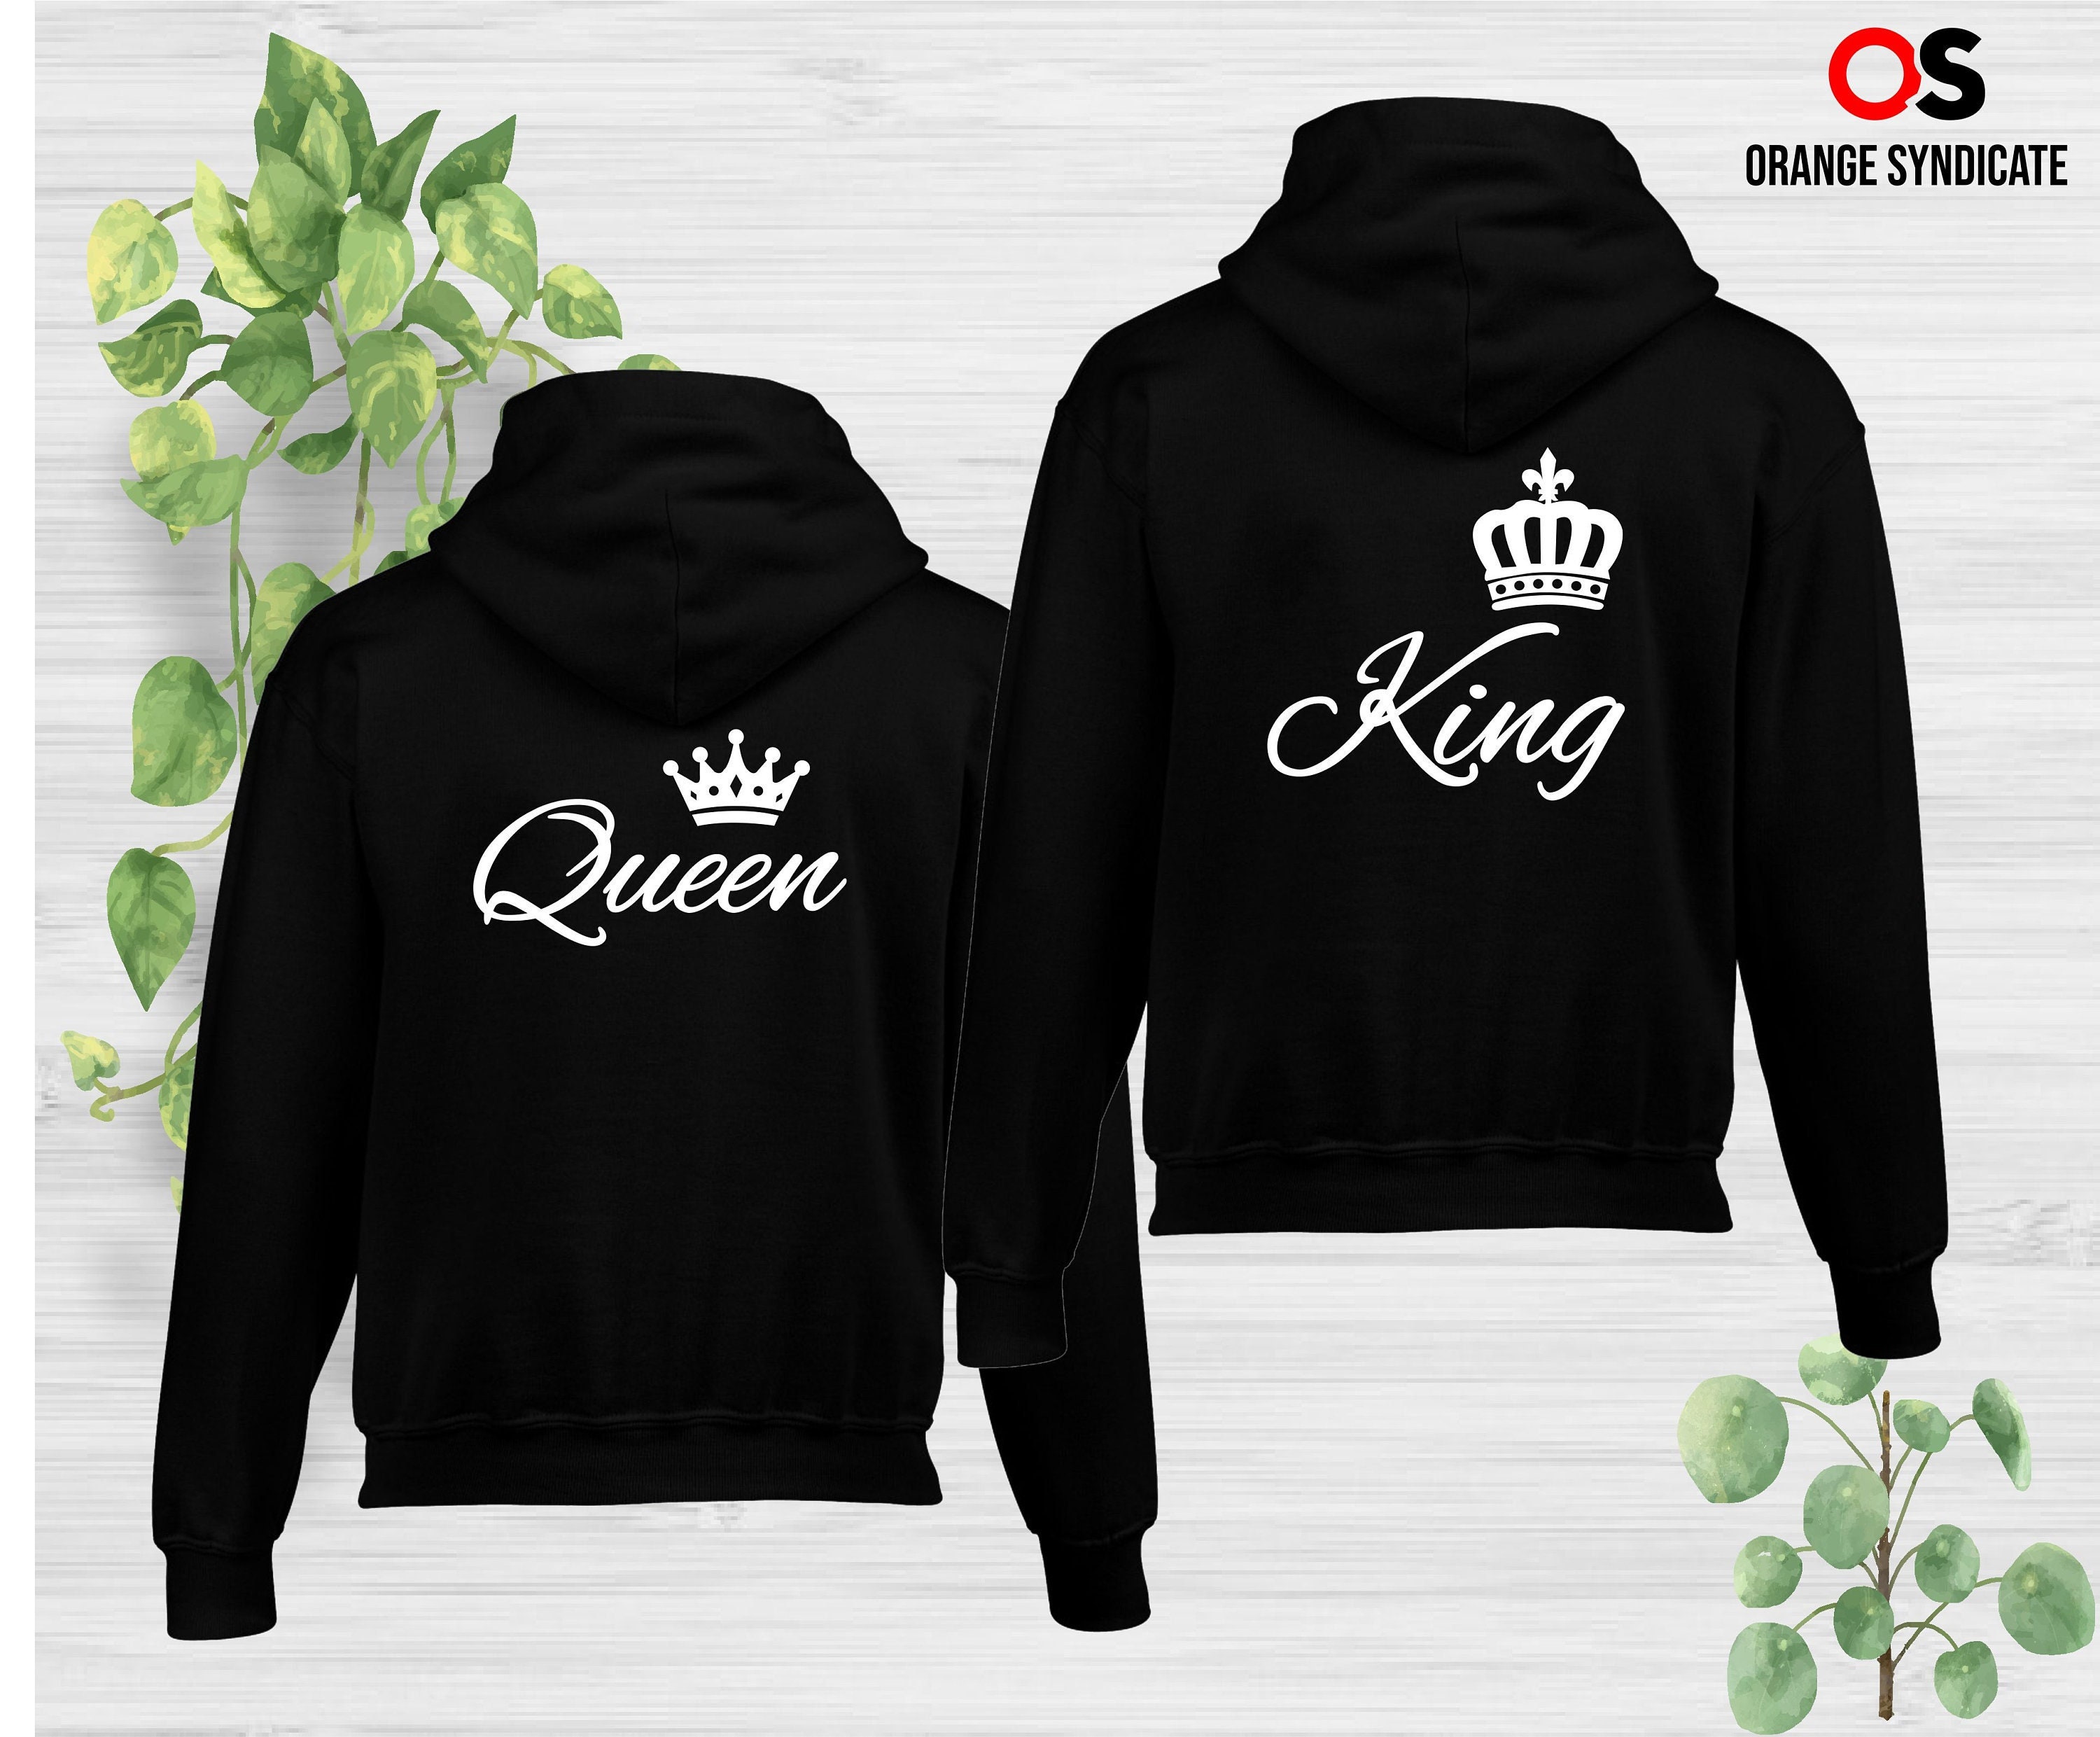 King Queen Printed Hoodies Valentines Day Gifts Couple Matching Wedding Present Marriage Lovely Unisex Sweatshirt Jumper Hood Tops